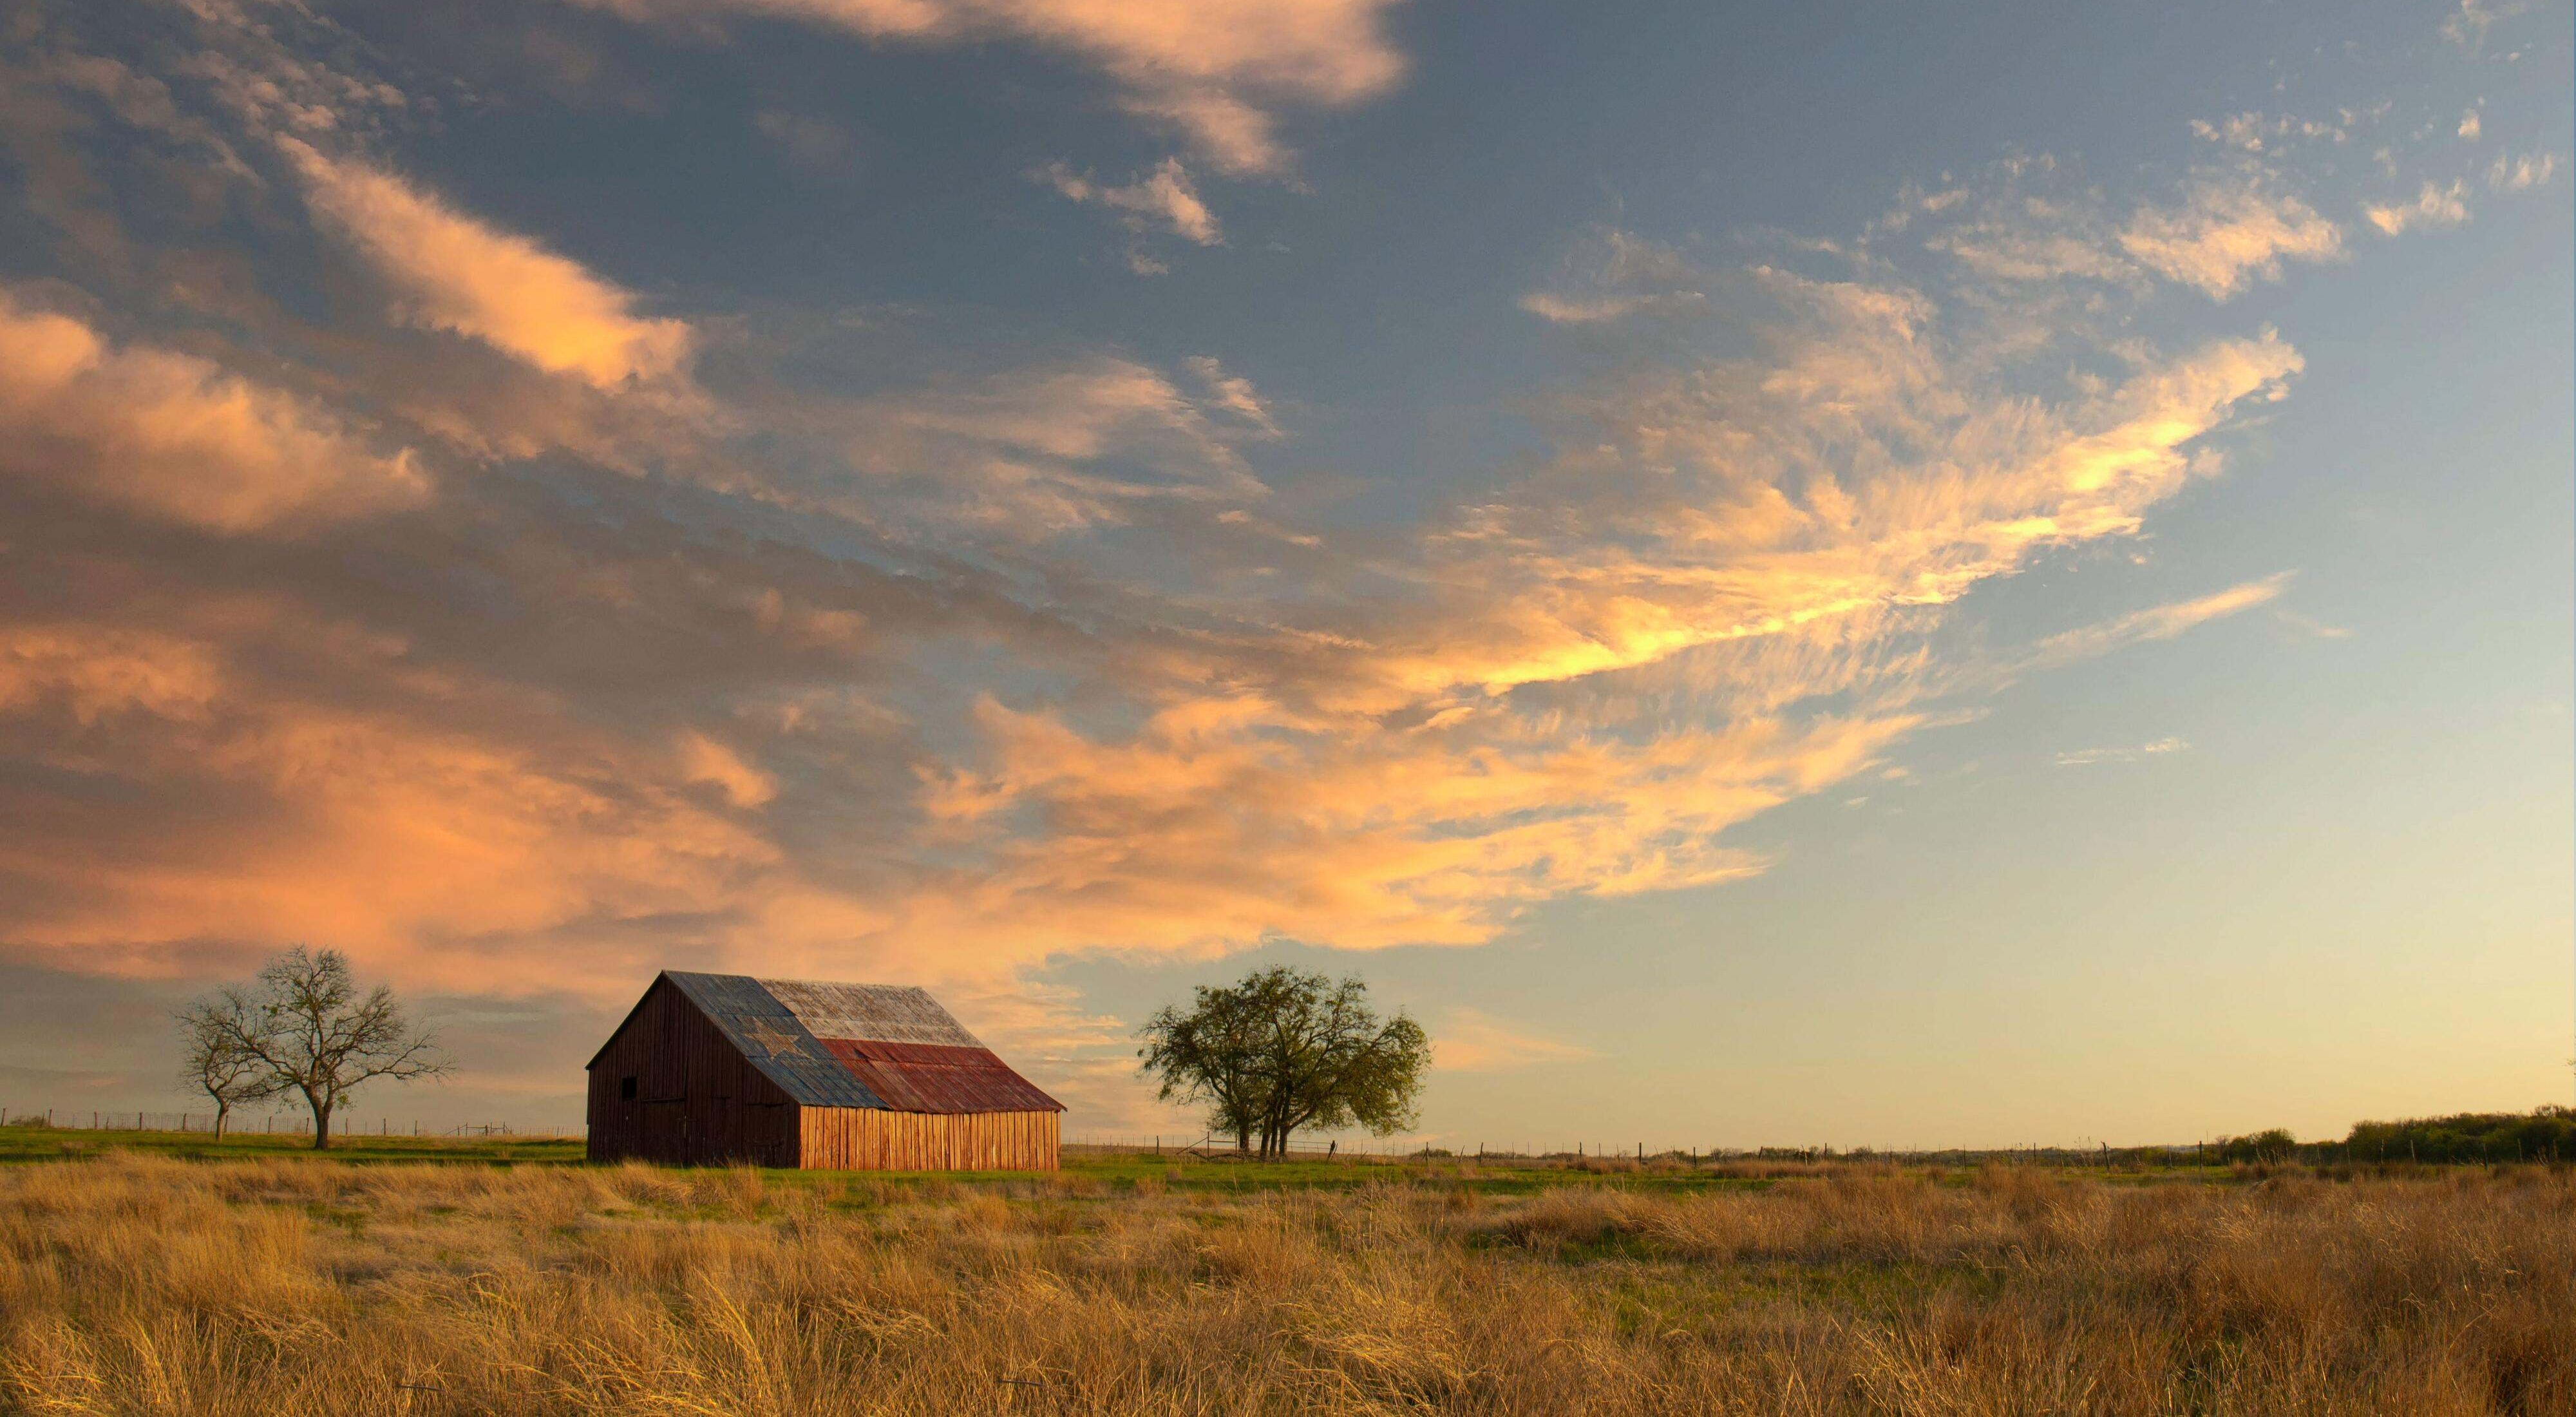 A painting of the Texas flag adorns the roof of a barn surrounded by tall prairie grass at sunset.